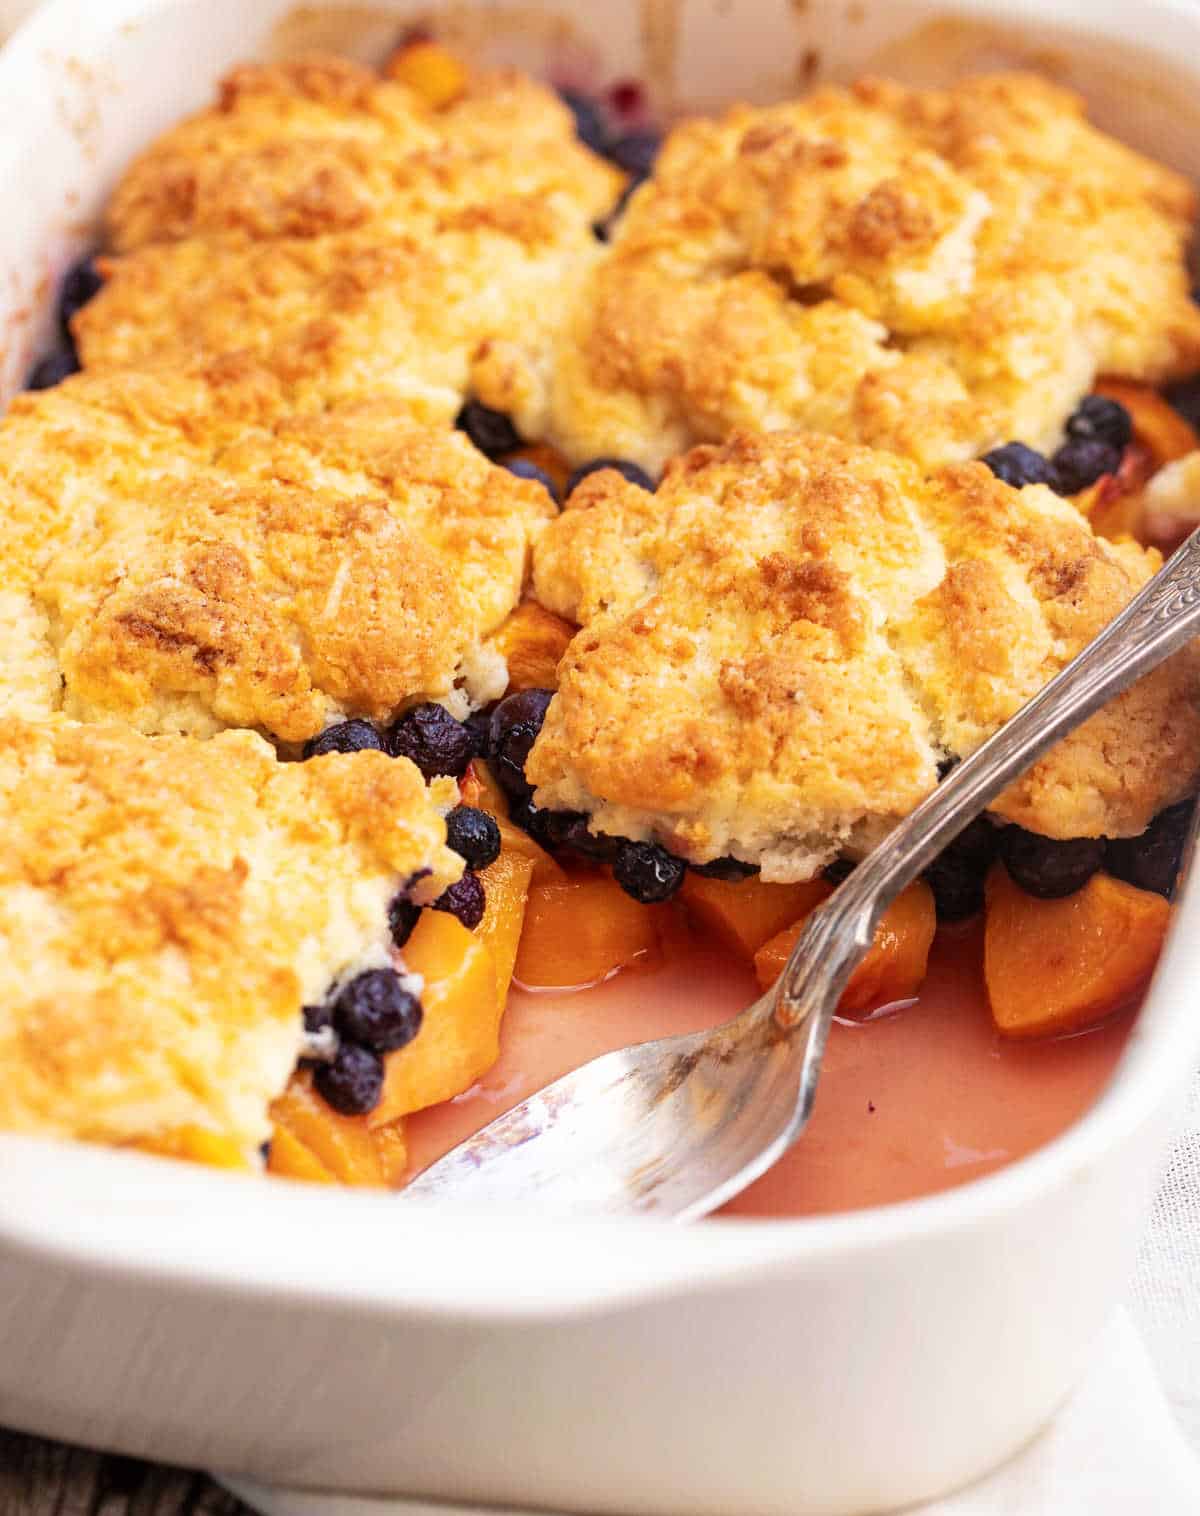 Off white dish with blueberry peach cobbler missing a serving, silver spoon inside.